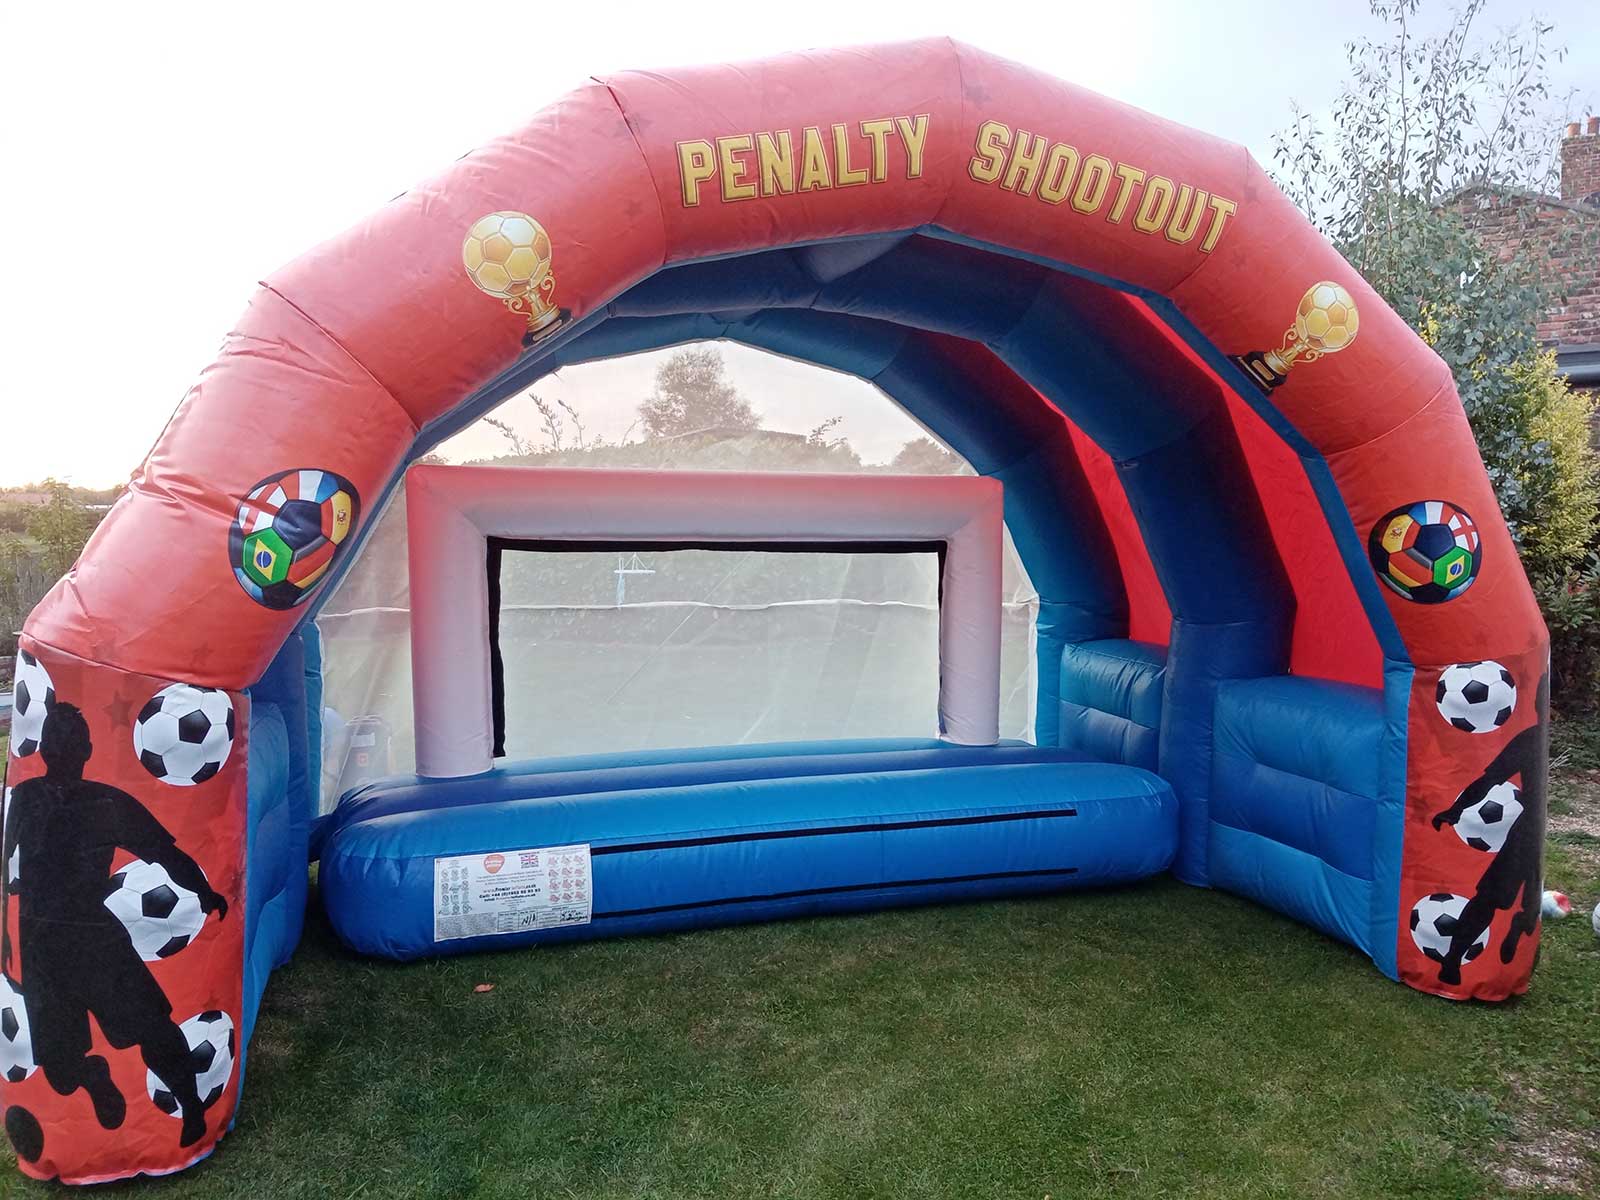 Penalty shoot out football goal bouncy castle from Wild and Bouncy in Driffield